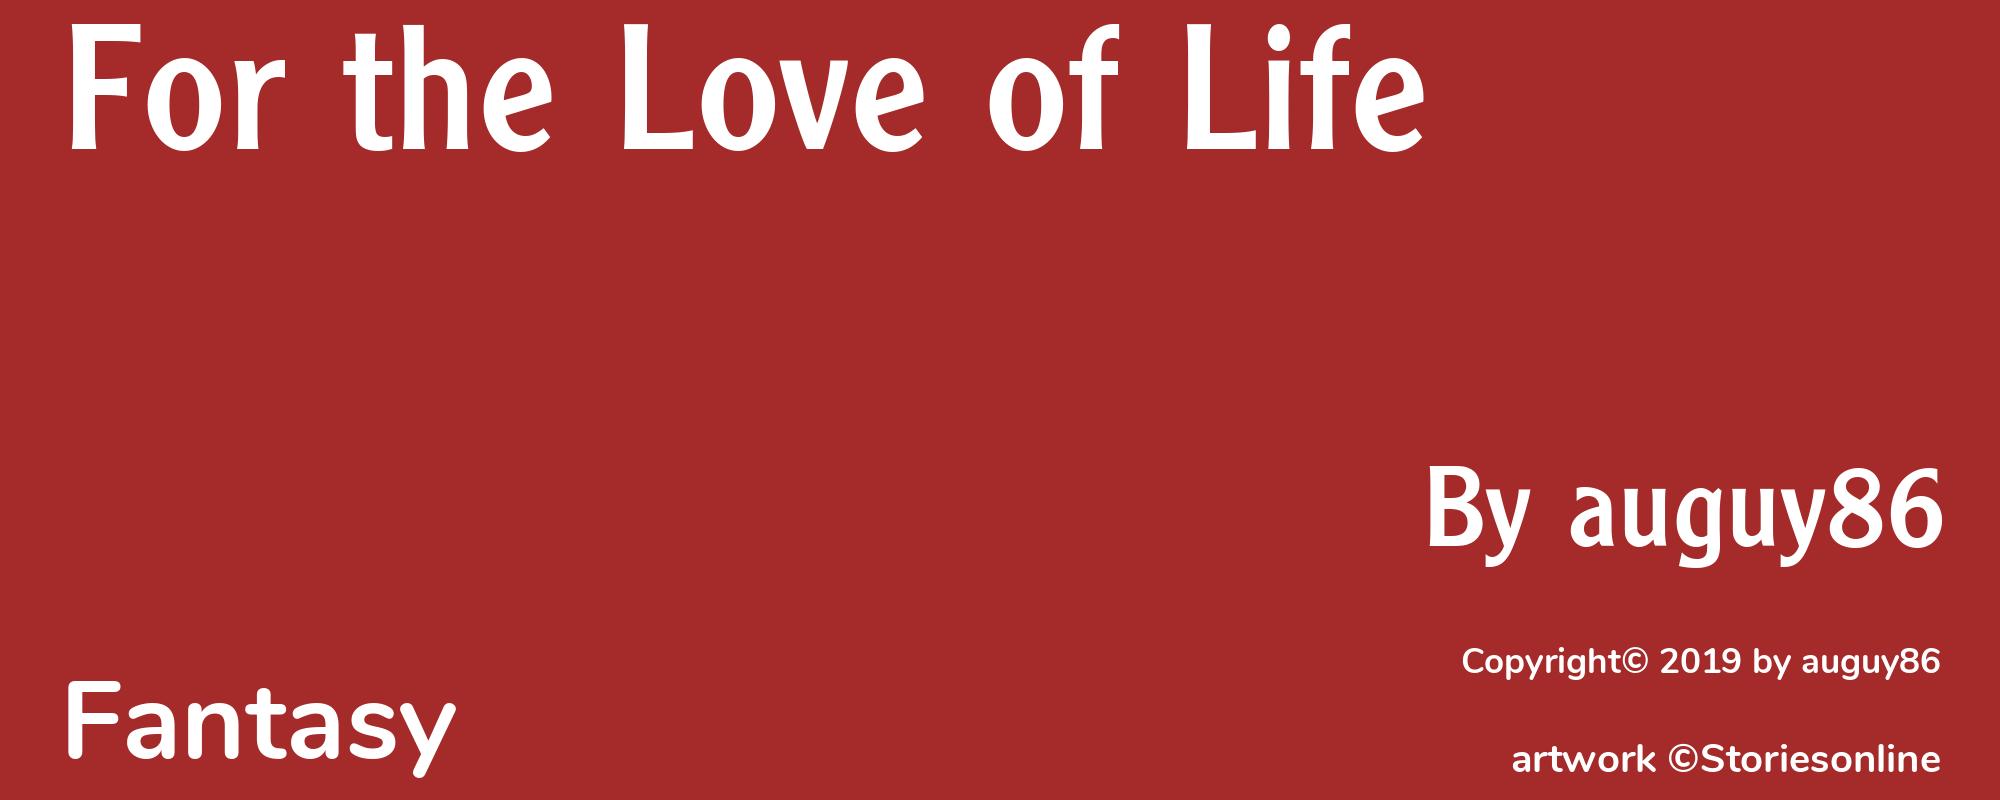 For the Love of Life - Cover